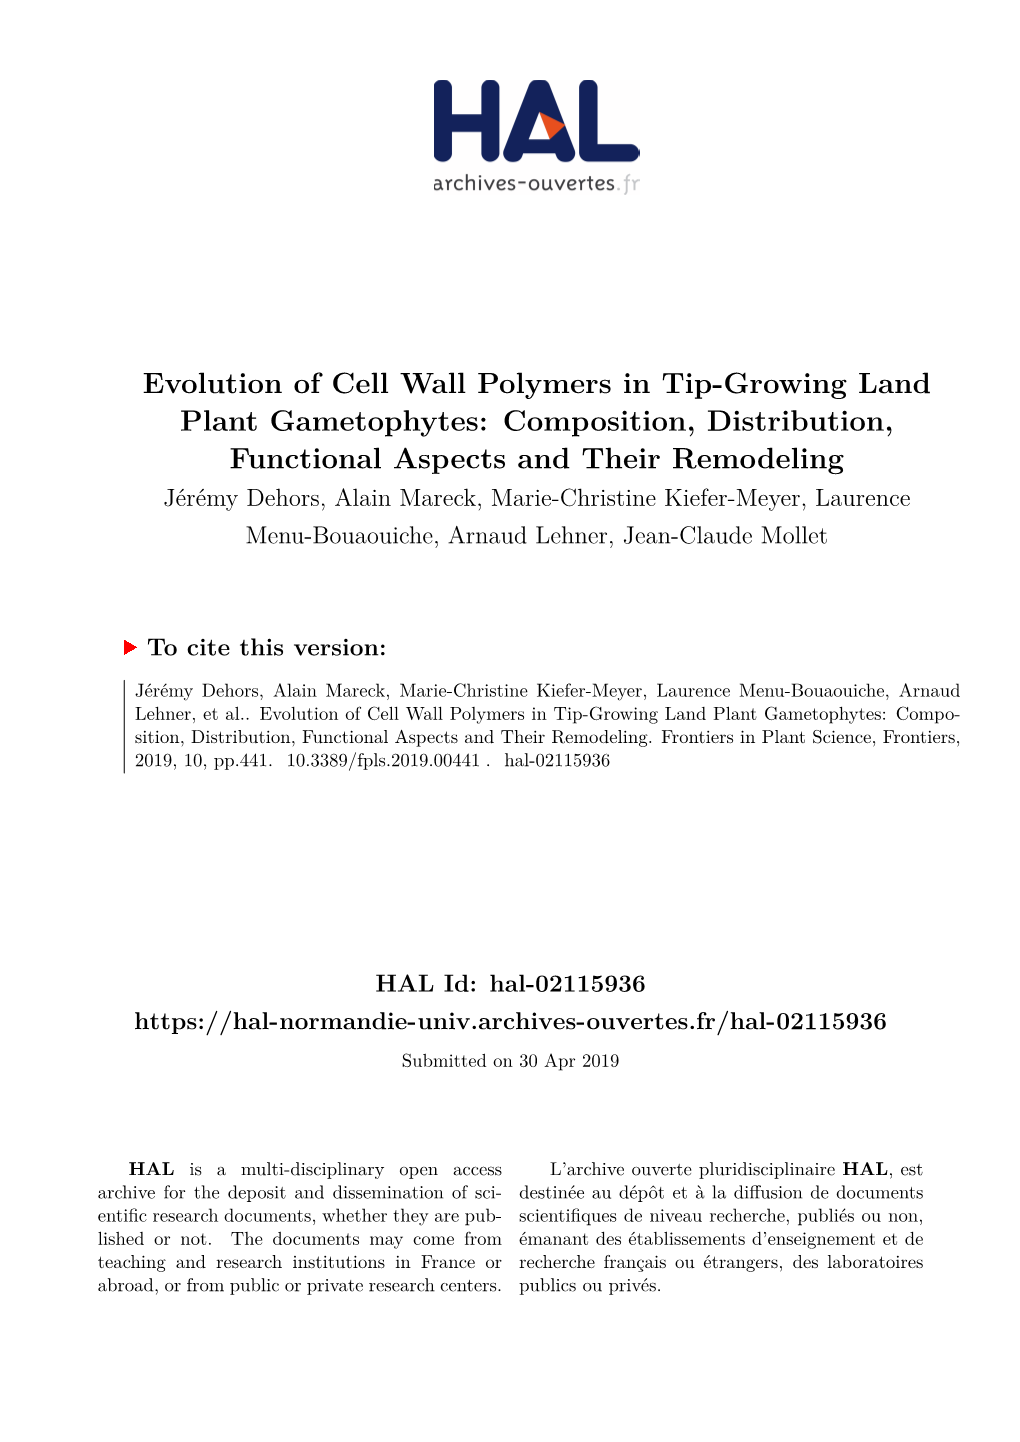 Evolution of Cell Wall Polymers in Tip